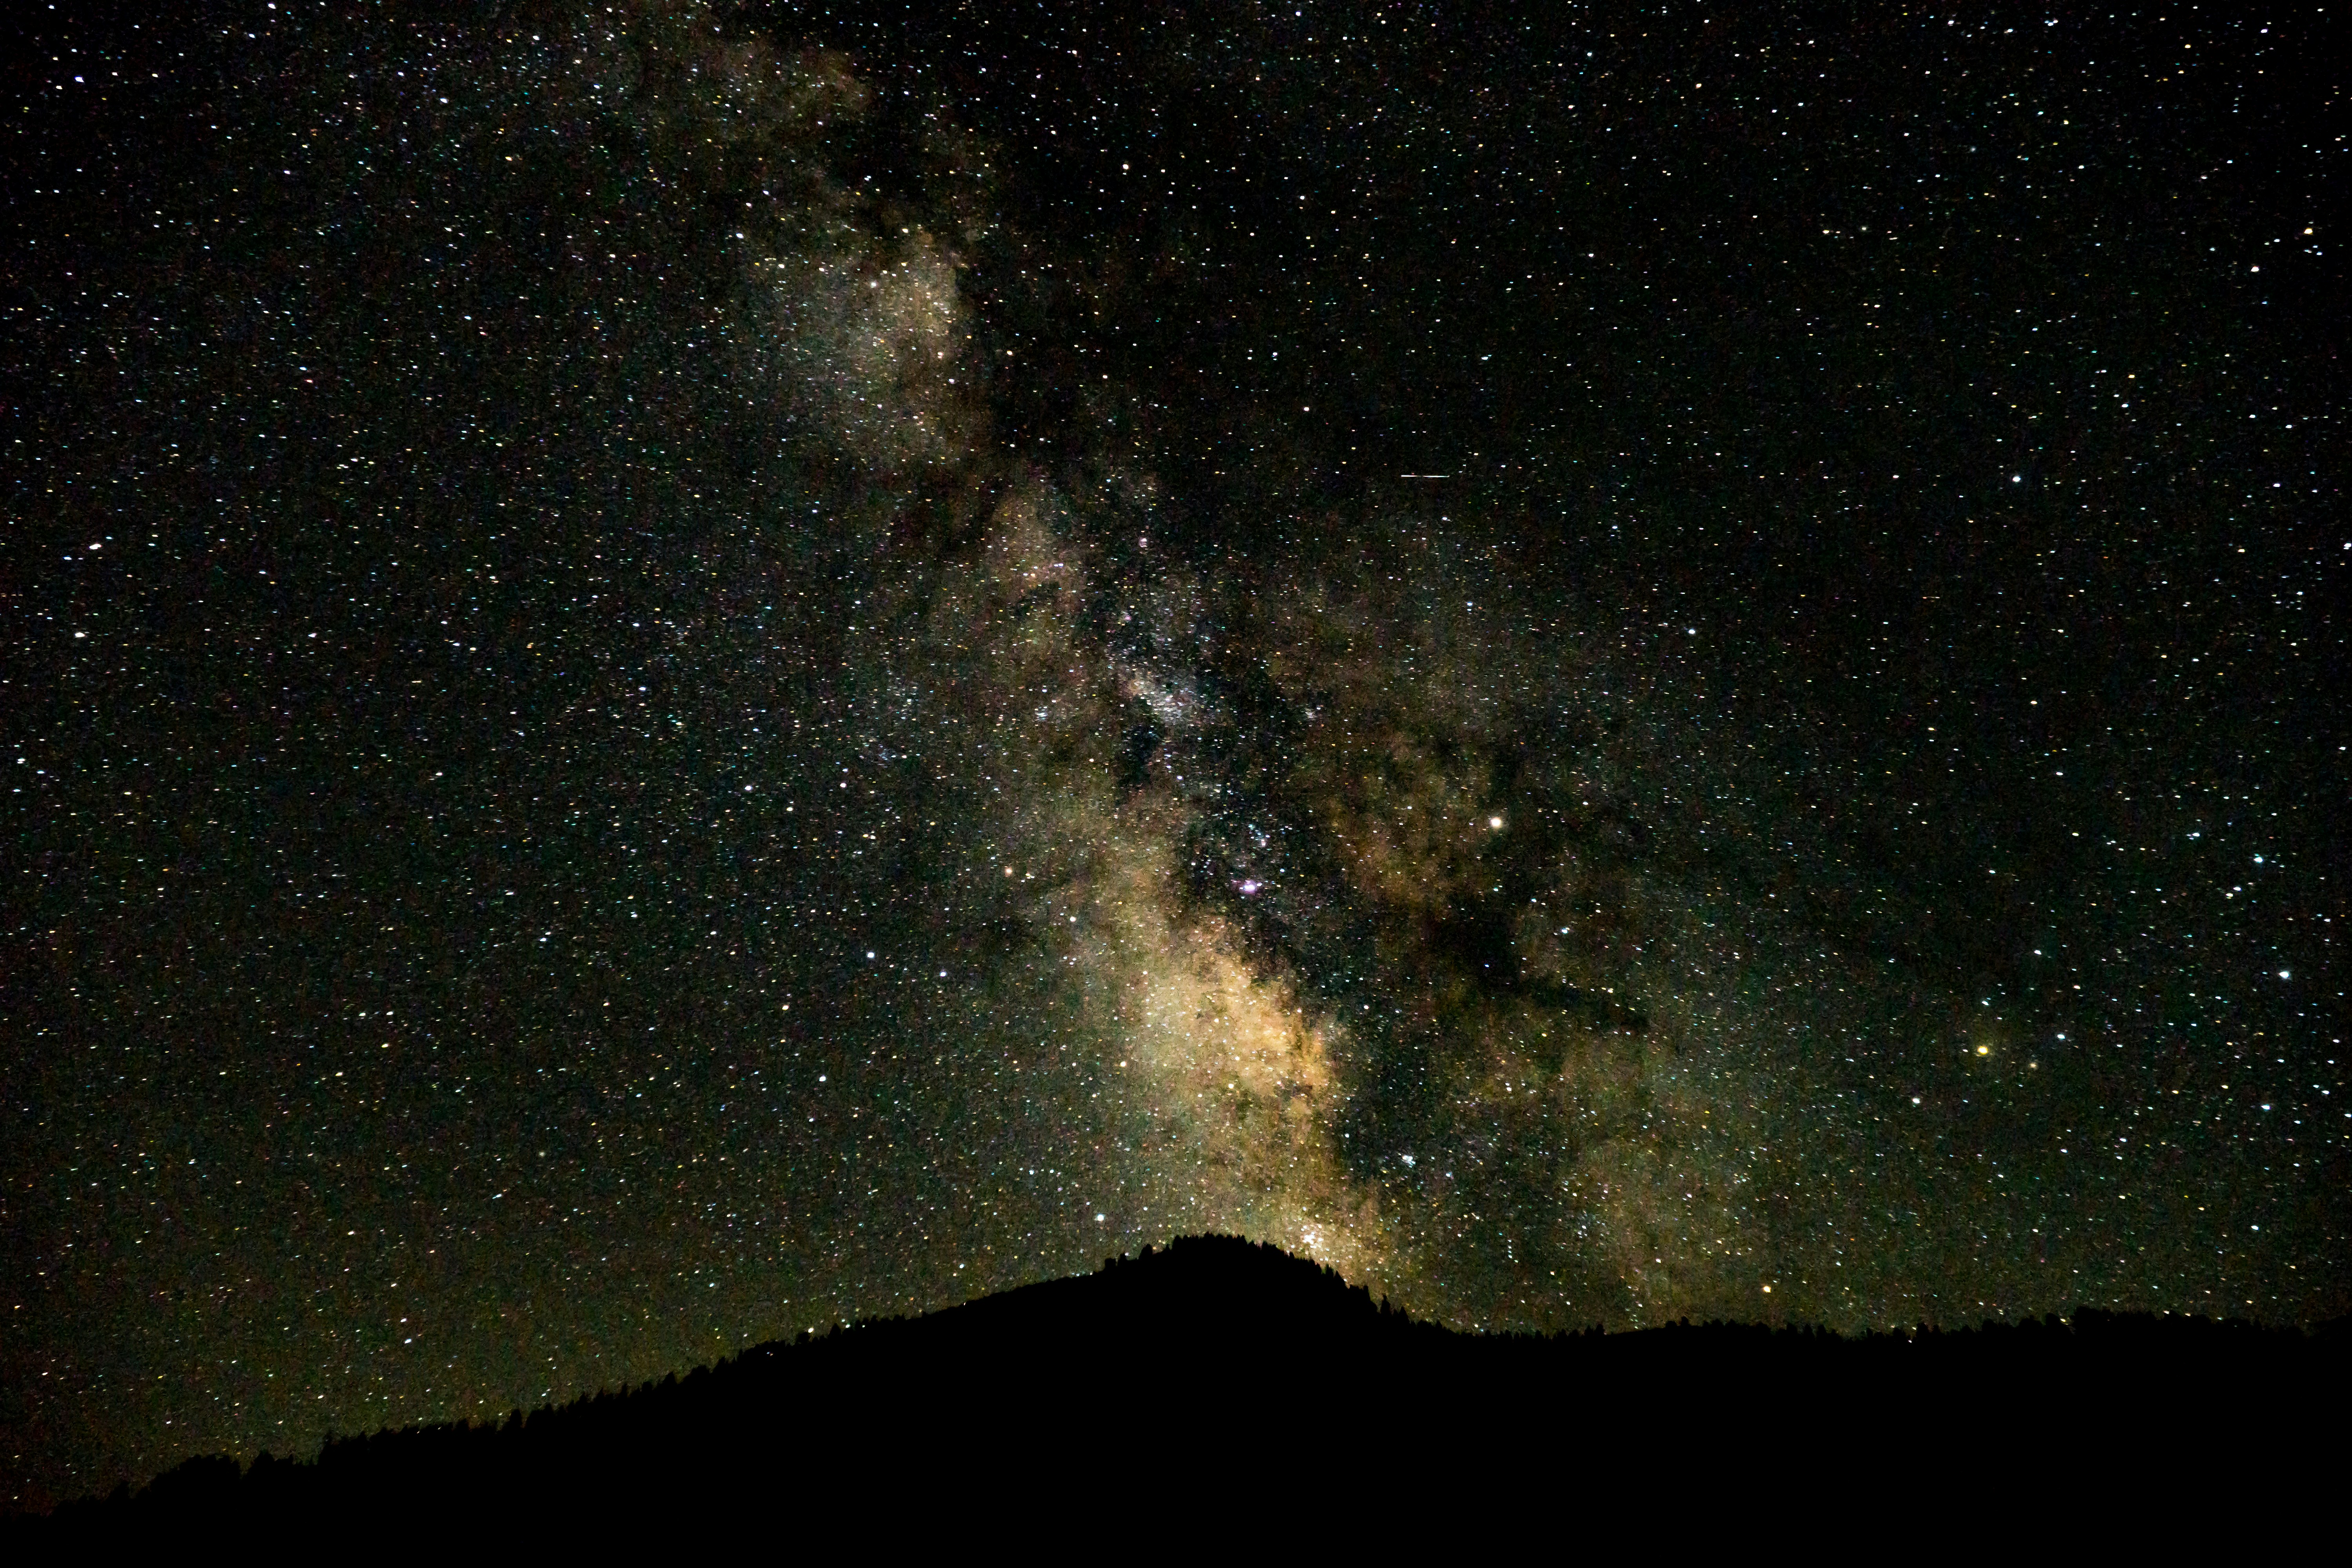 Taken right outside of the west side of Rocky Mountain National Park around 1am. It was incredible how visible the milkyway was to even the naked eye.